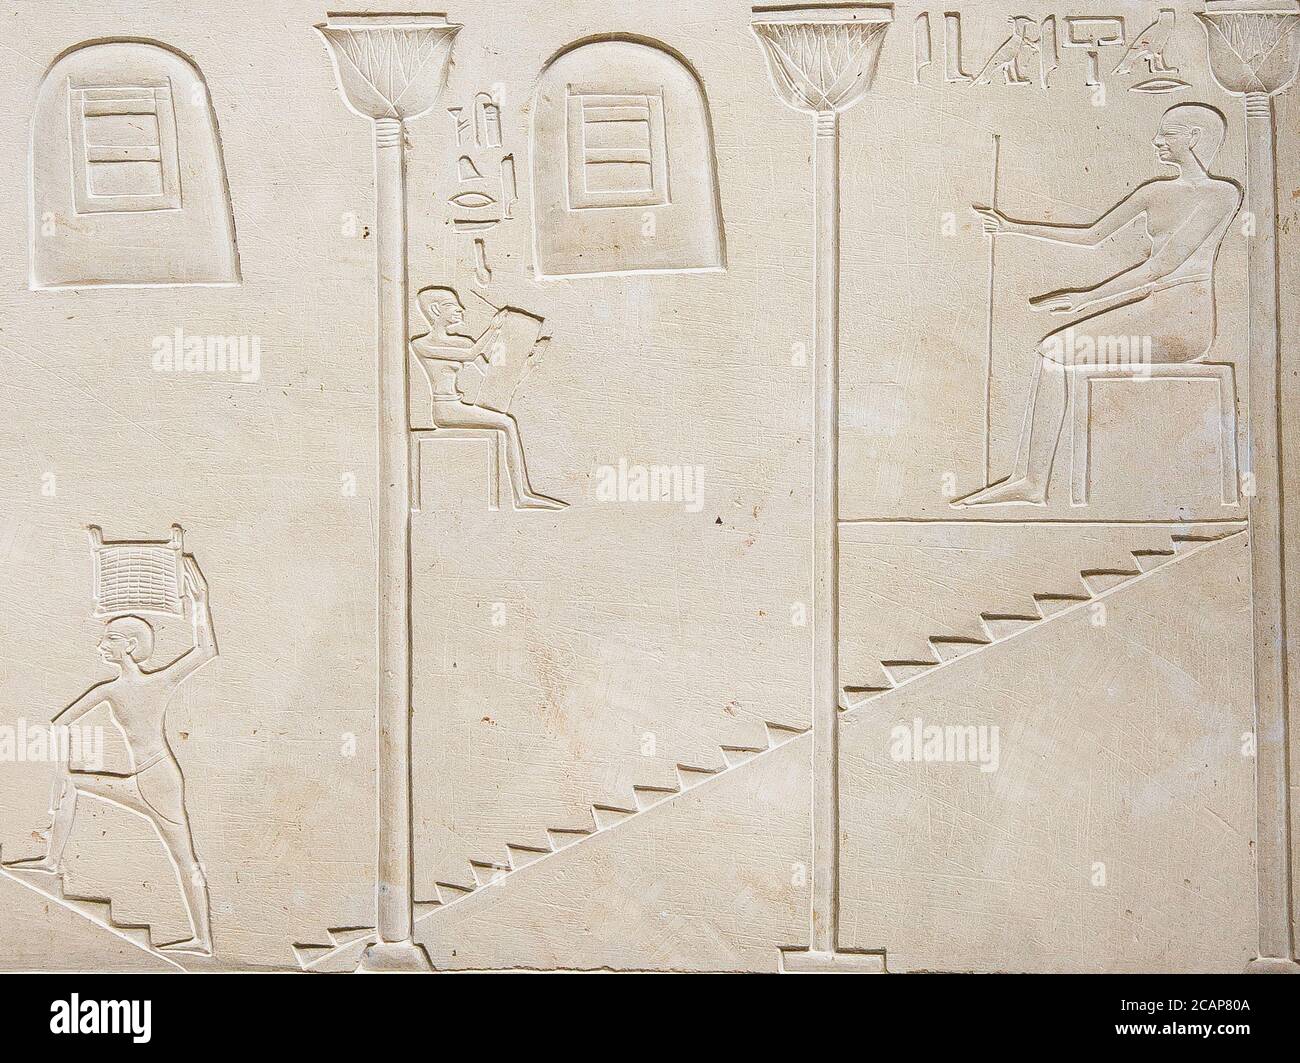 Cairo, Egyptian Museum, sarcophagus of the queen Ashait, with some of the finest reliefs ever carved in Egypt. Ashait was a wife of Montuhotep 2. Stock Photo